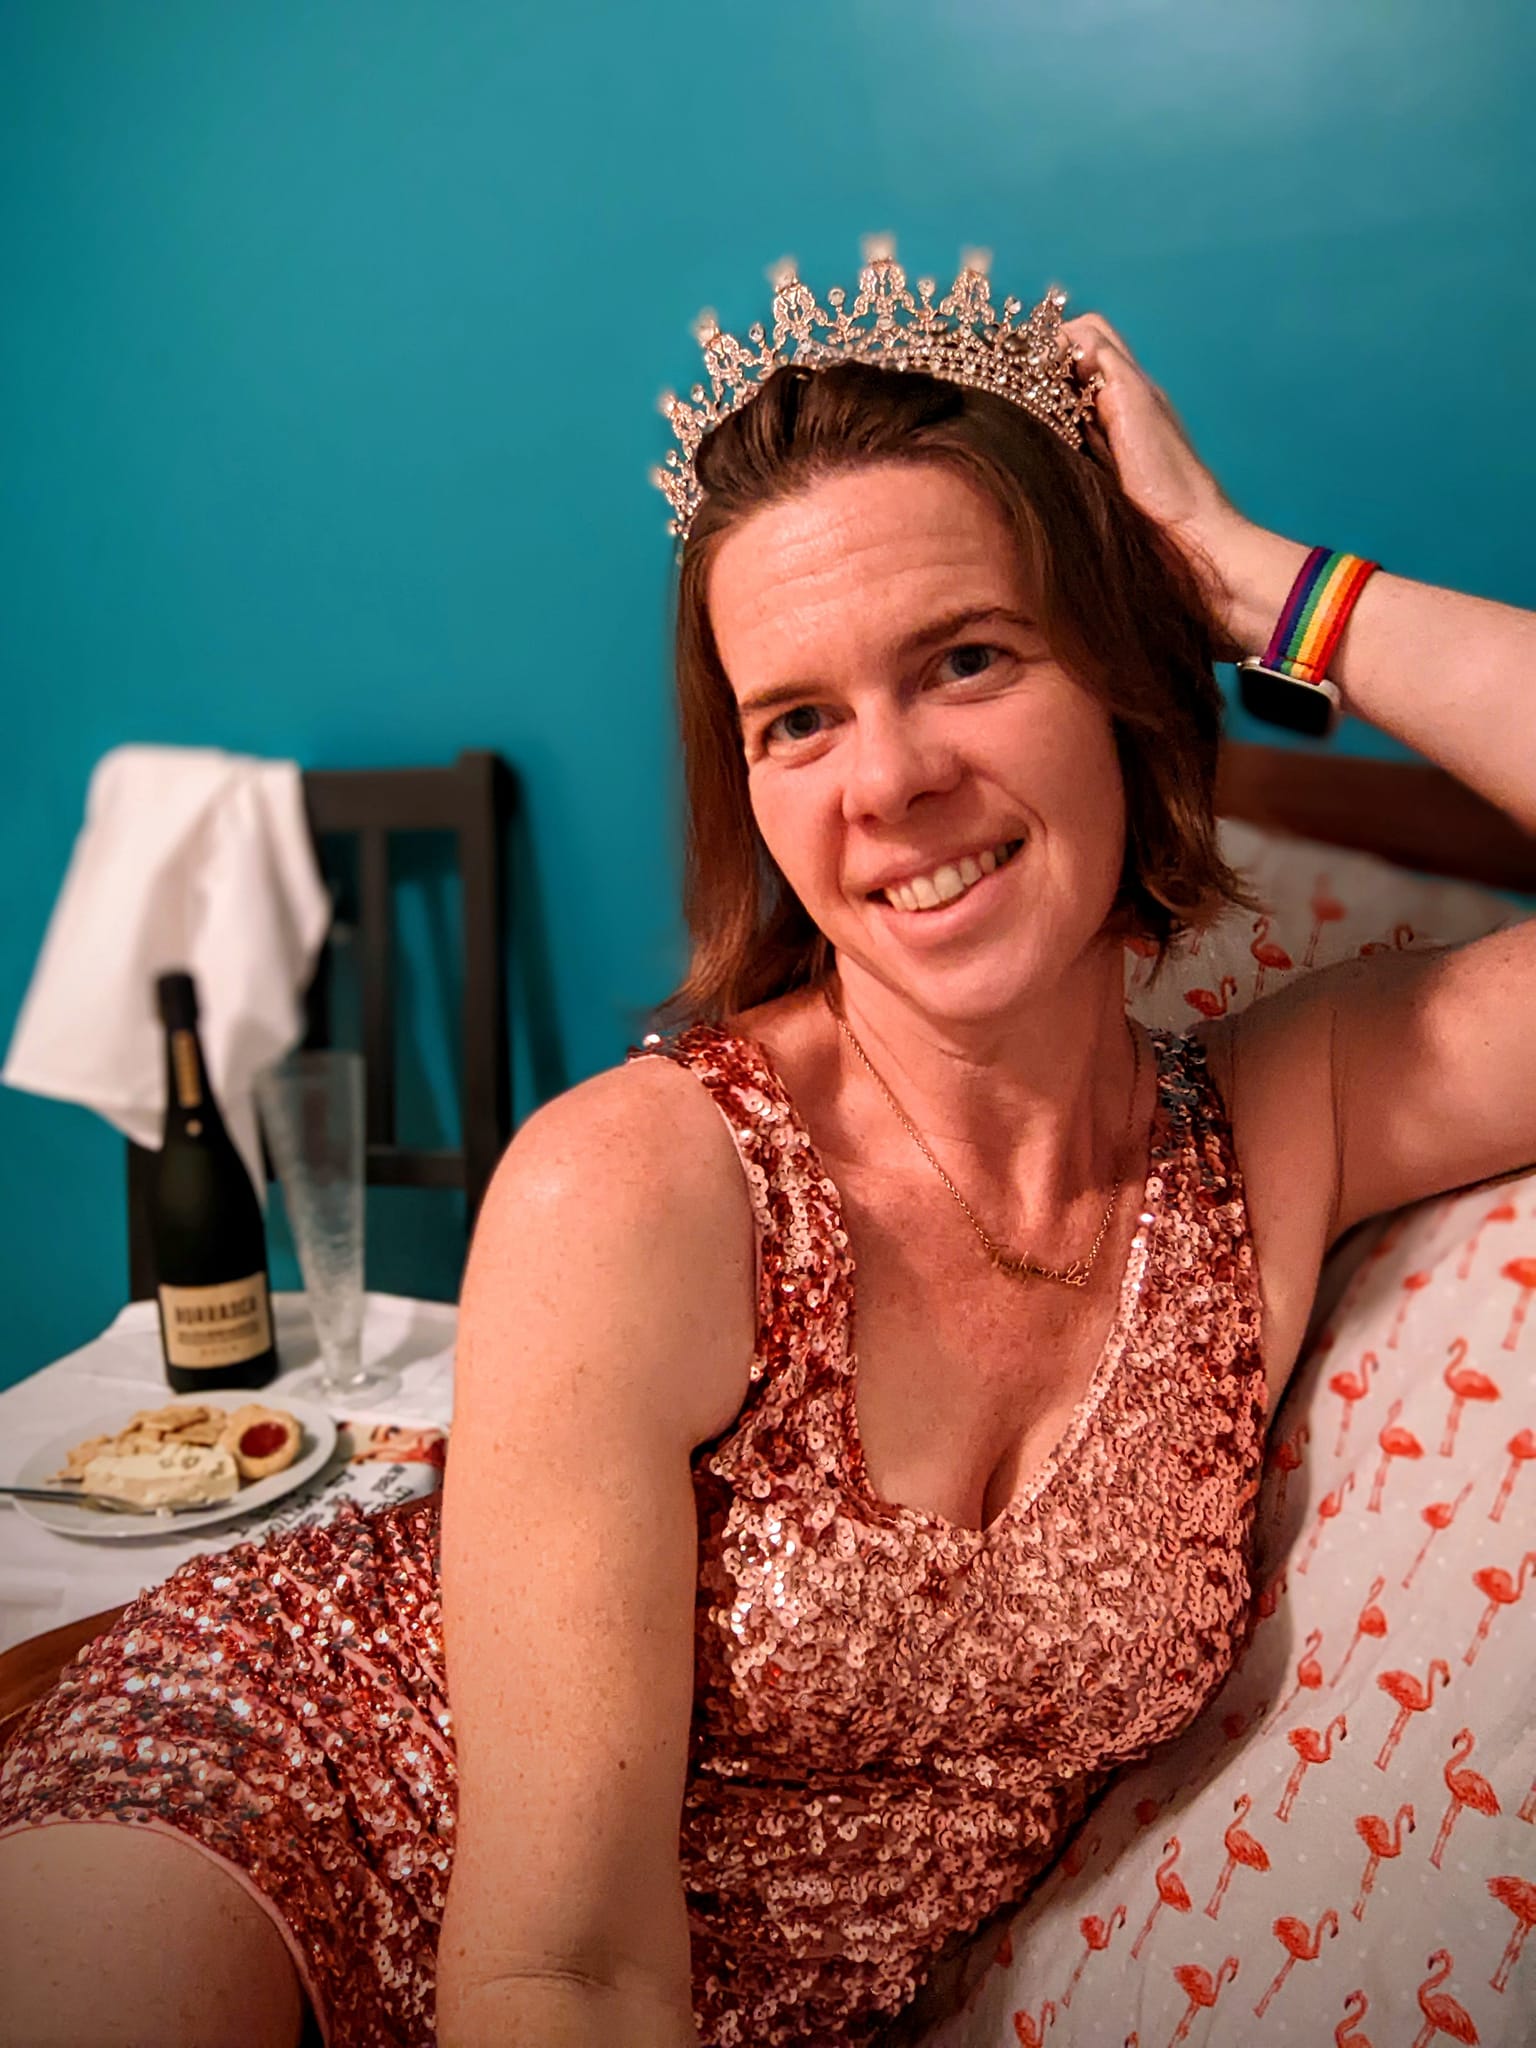 selfie of a person in a tiara and a glittery dress lounging on a chair with a bottle of bubbly and snacks behind her